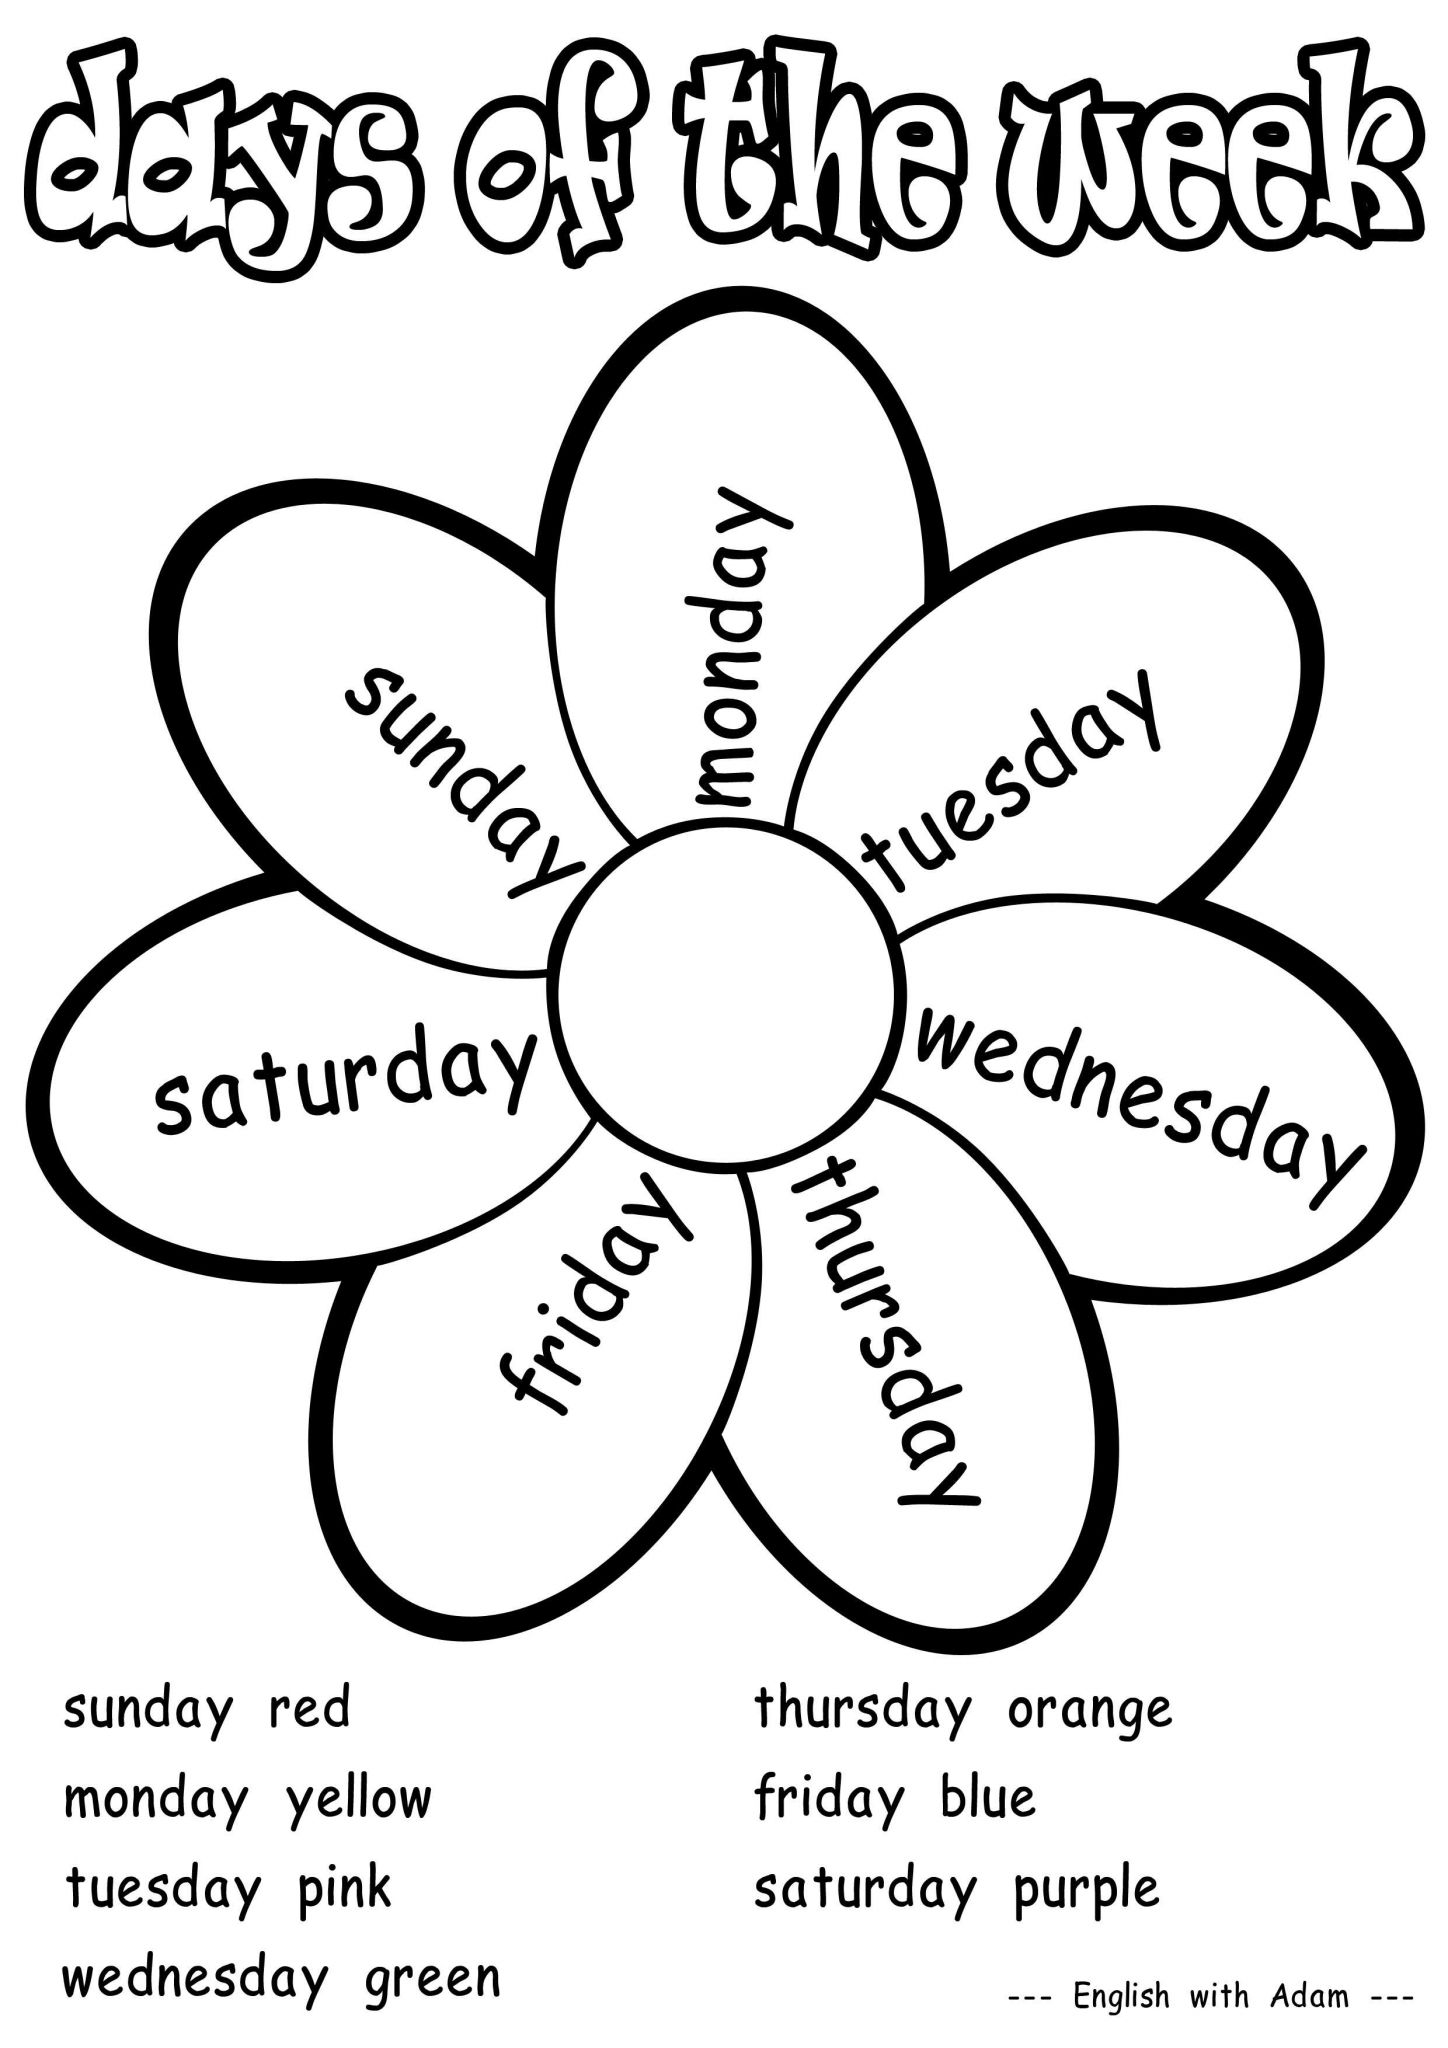 Seventh Grade English Worksheets Along with Days Of the Week Coloring Activity Grade 1 Worksheets